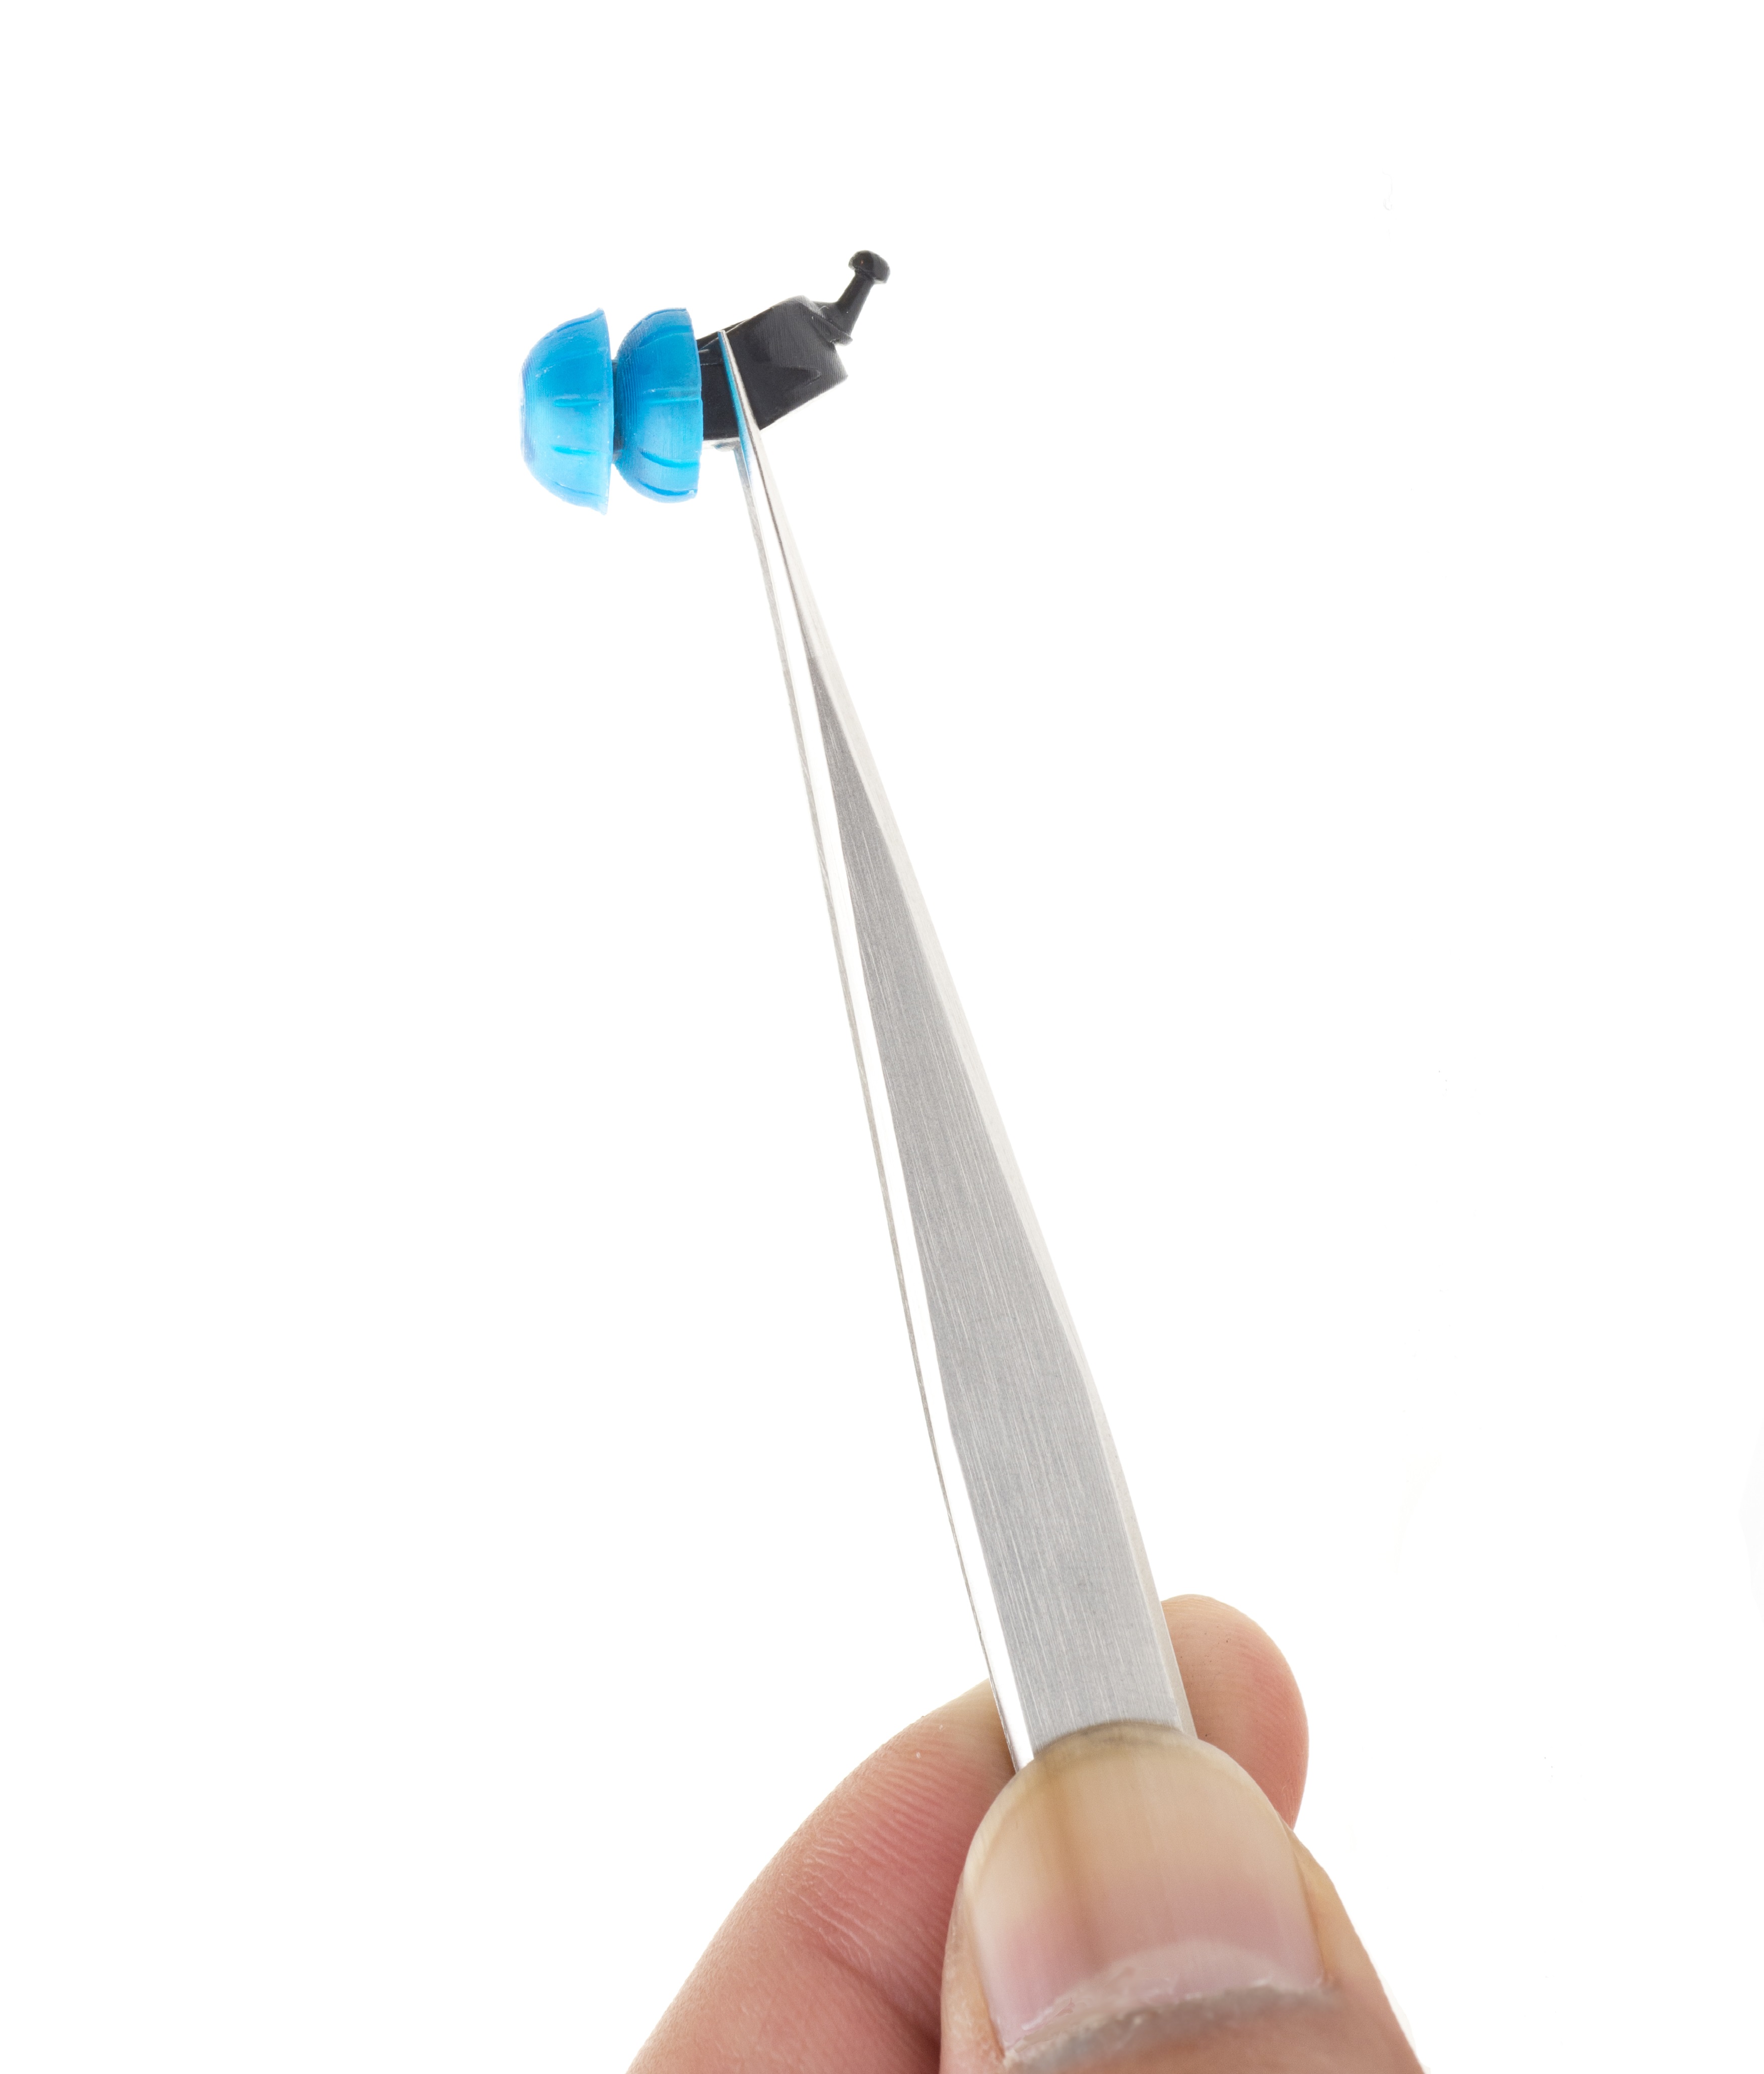 iHear hearing aid is small, invisible and affordable.